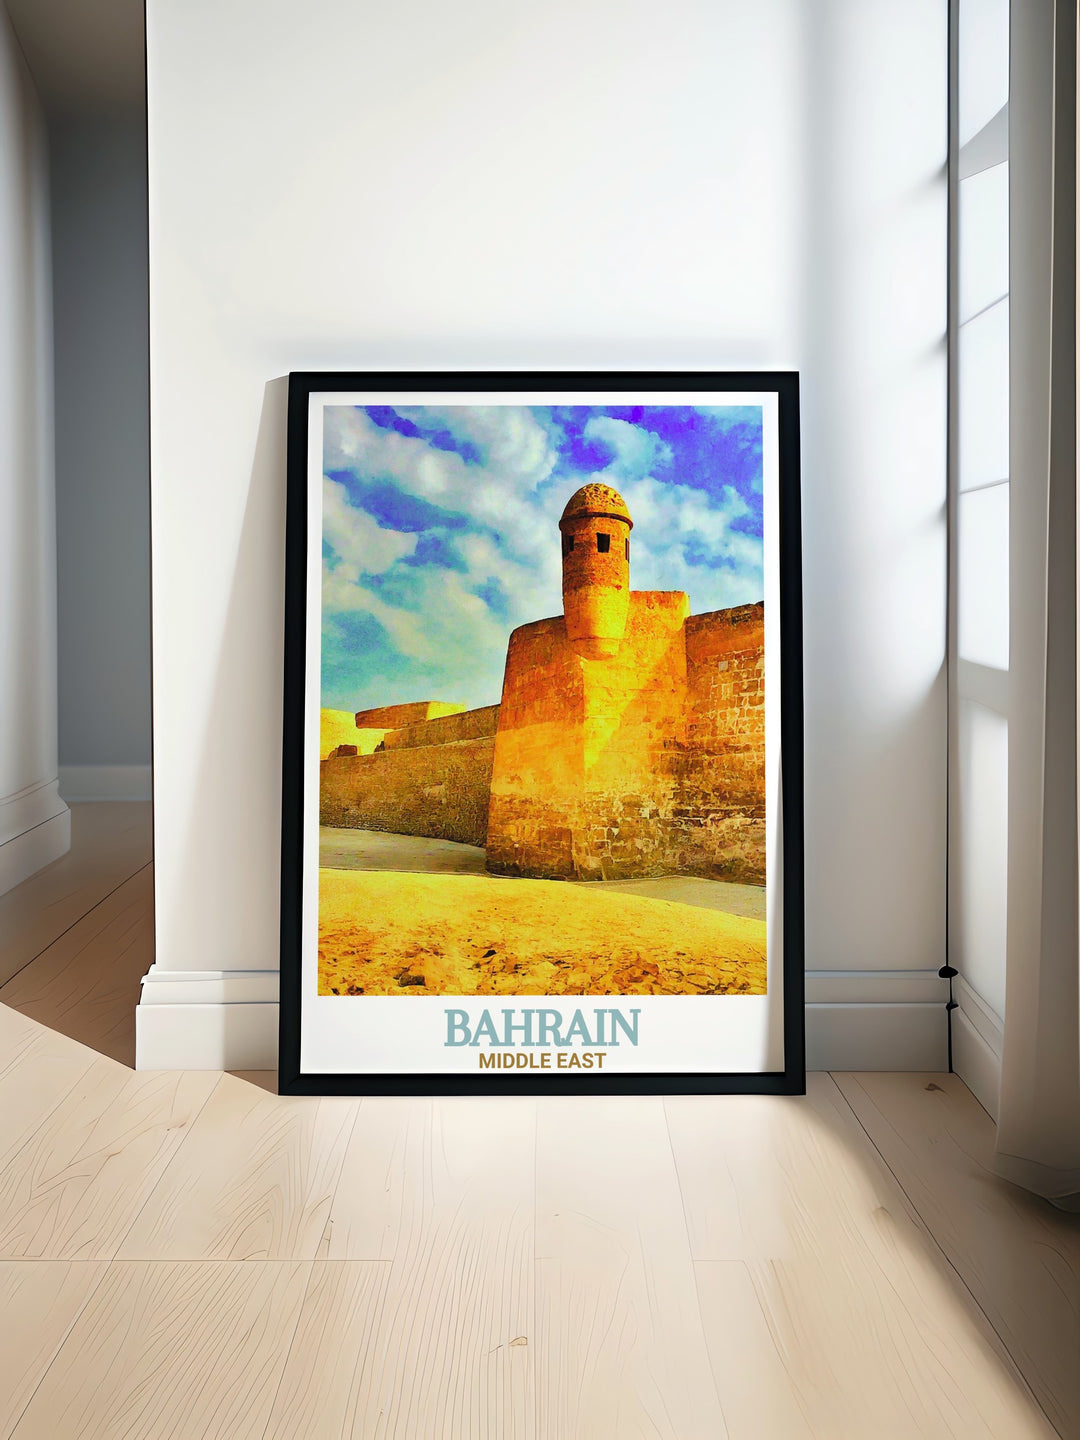 Bahrain Print featuring Bahrain Fort in vibrant colors perfect for wall decor or a travel souvenir bringing the beauty and heritage of Bahrain into your home with stunning artwork and meticulous craftsmanship.